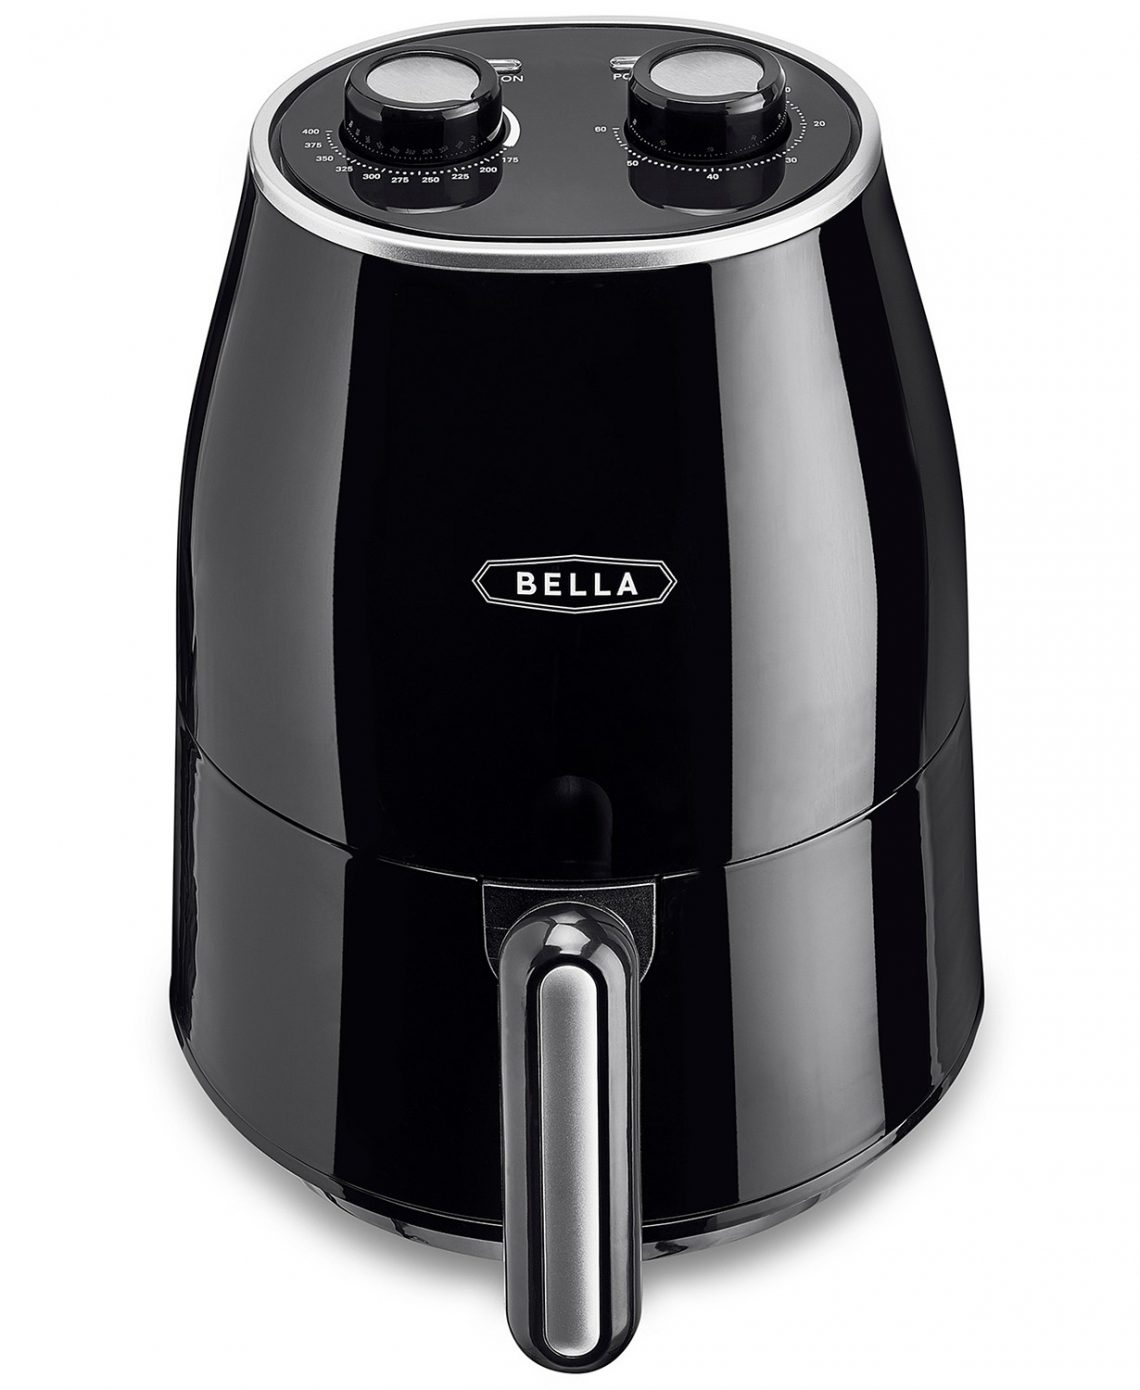 bella-1-6-qt-air-convection-fryer-19-99-after-10-mail-in-rebate-reg